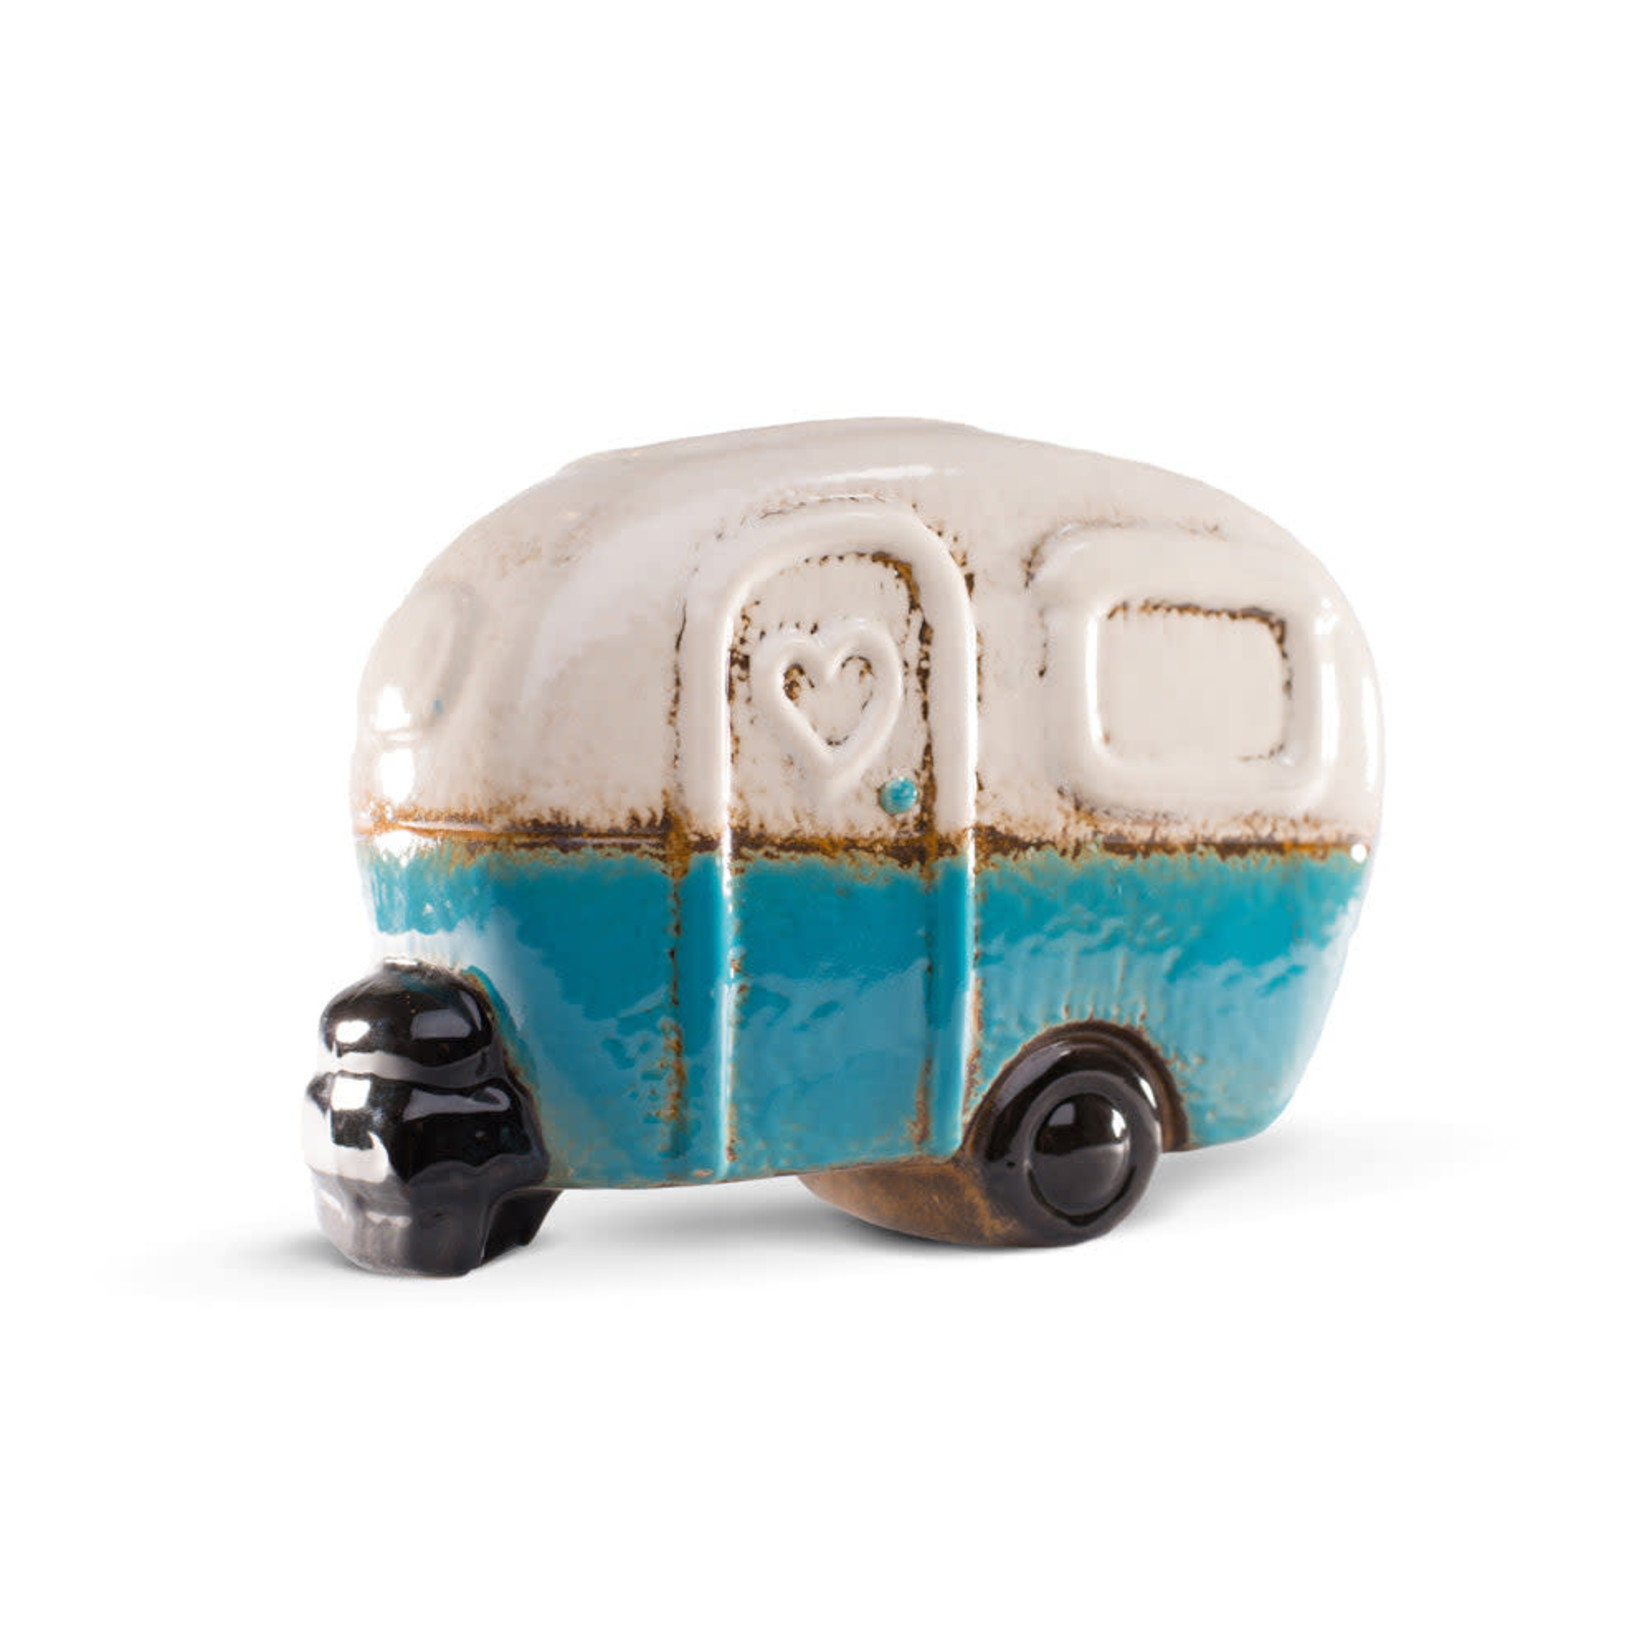 Finch Berry Blue Camper Toothbrush Holder